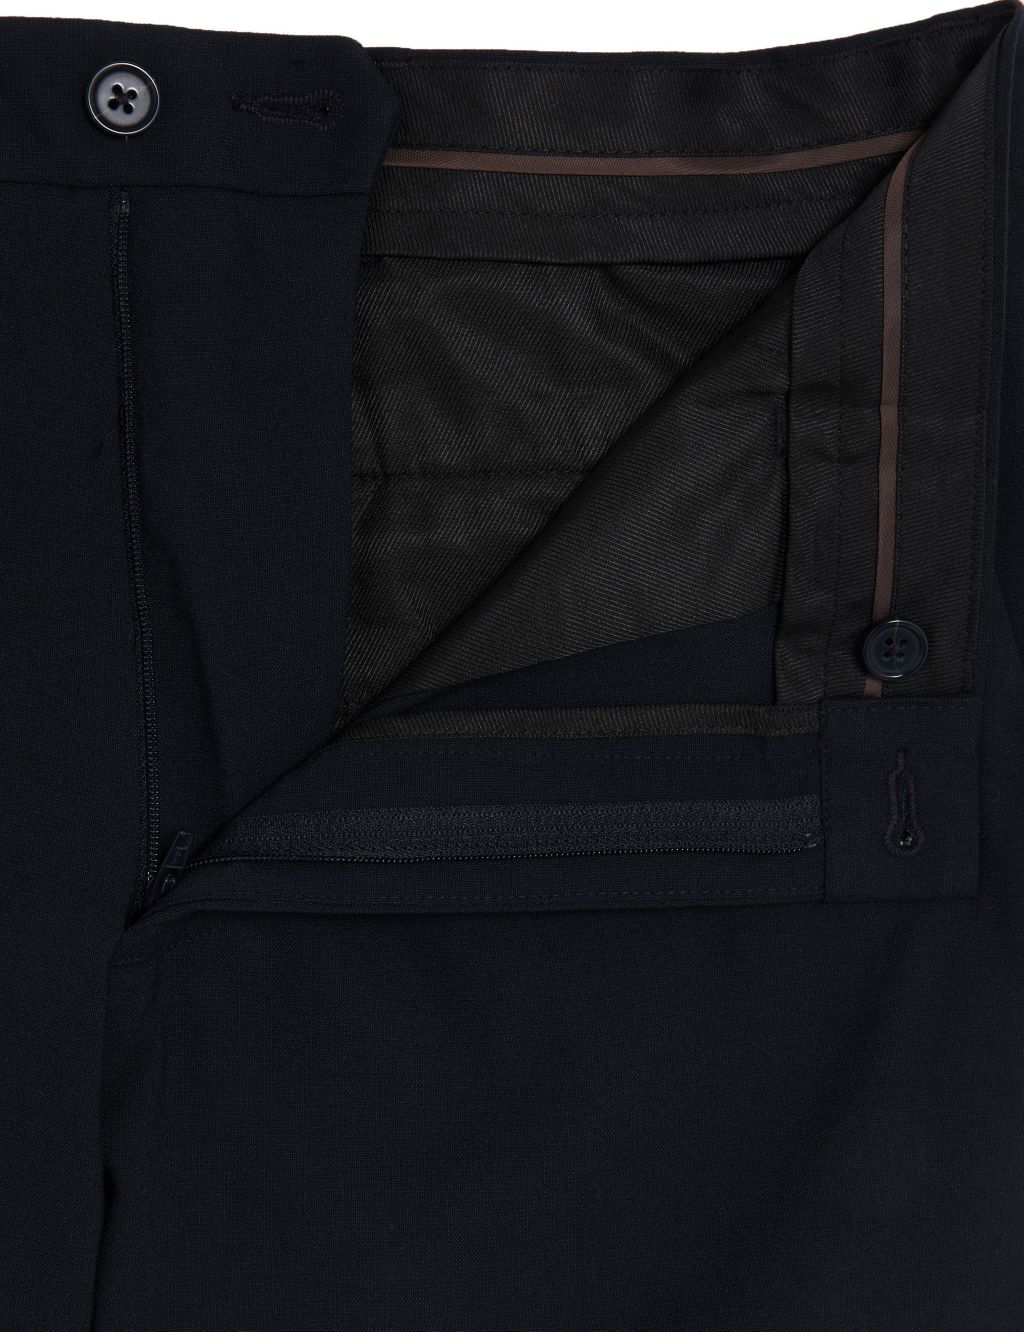 Tailored Fit Flat Front Stretch Trousers image 6